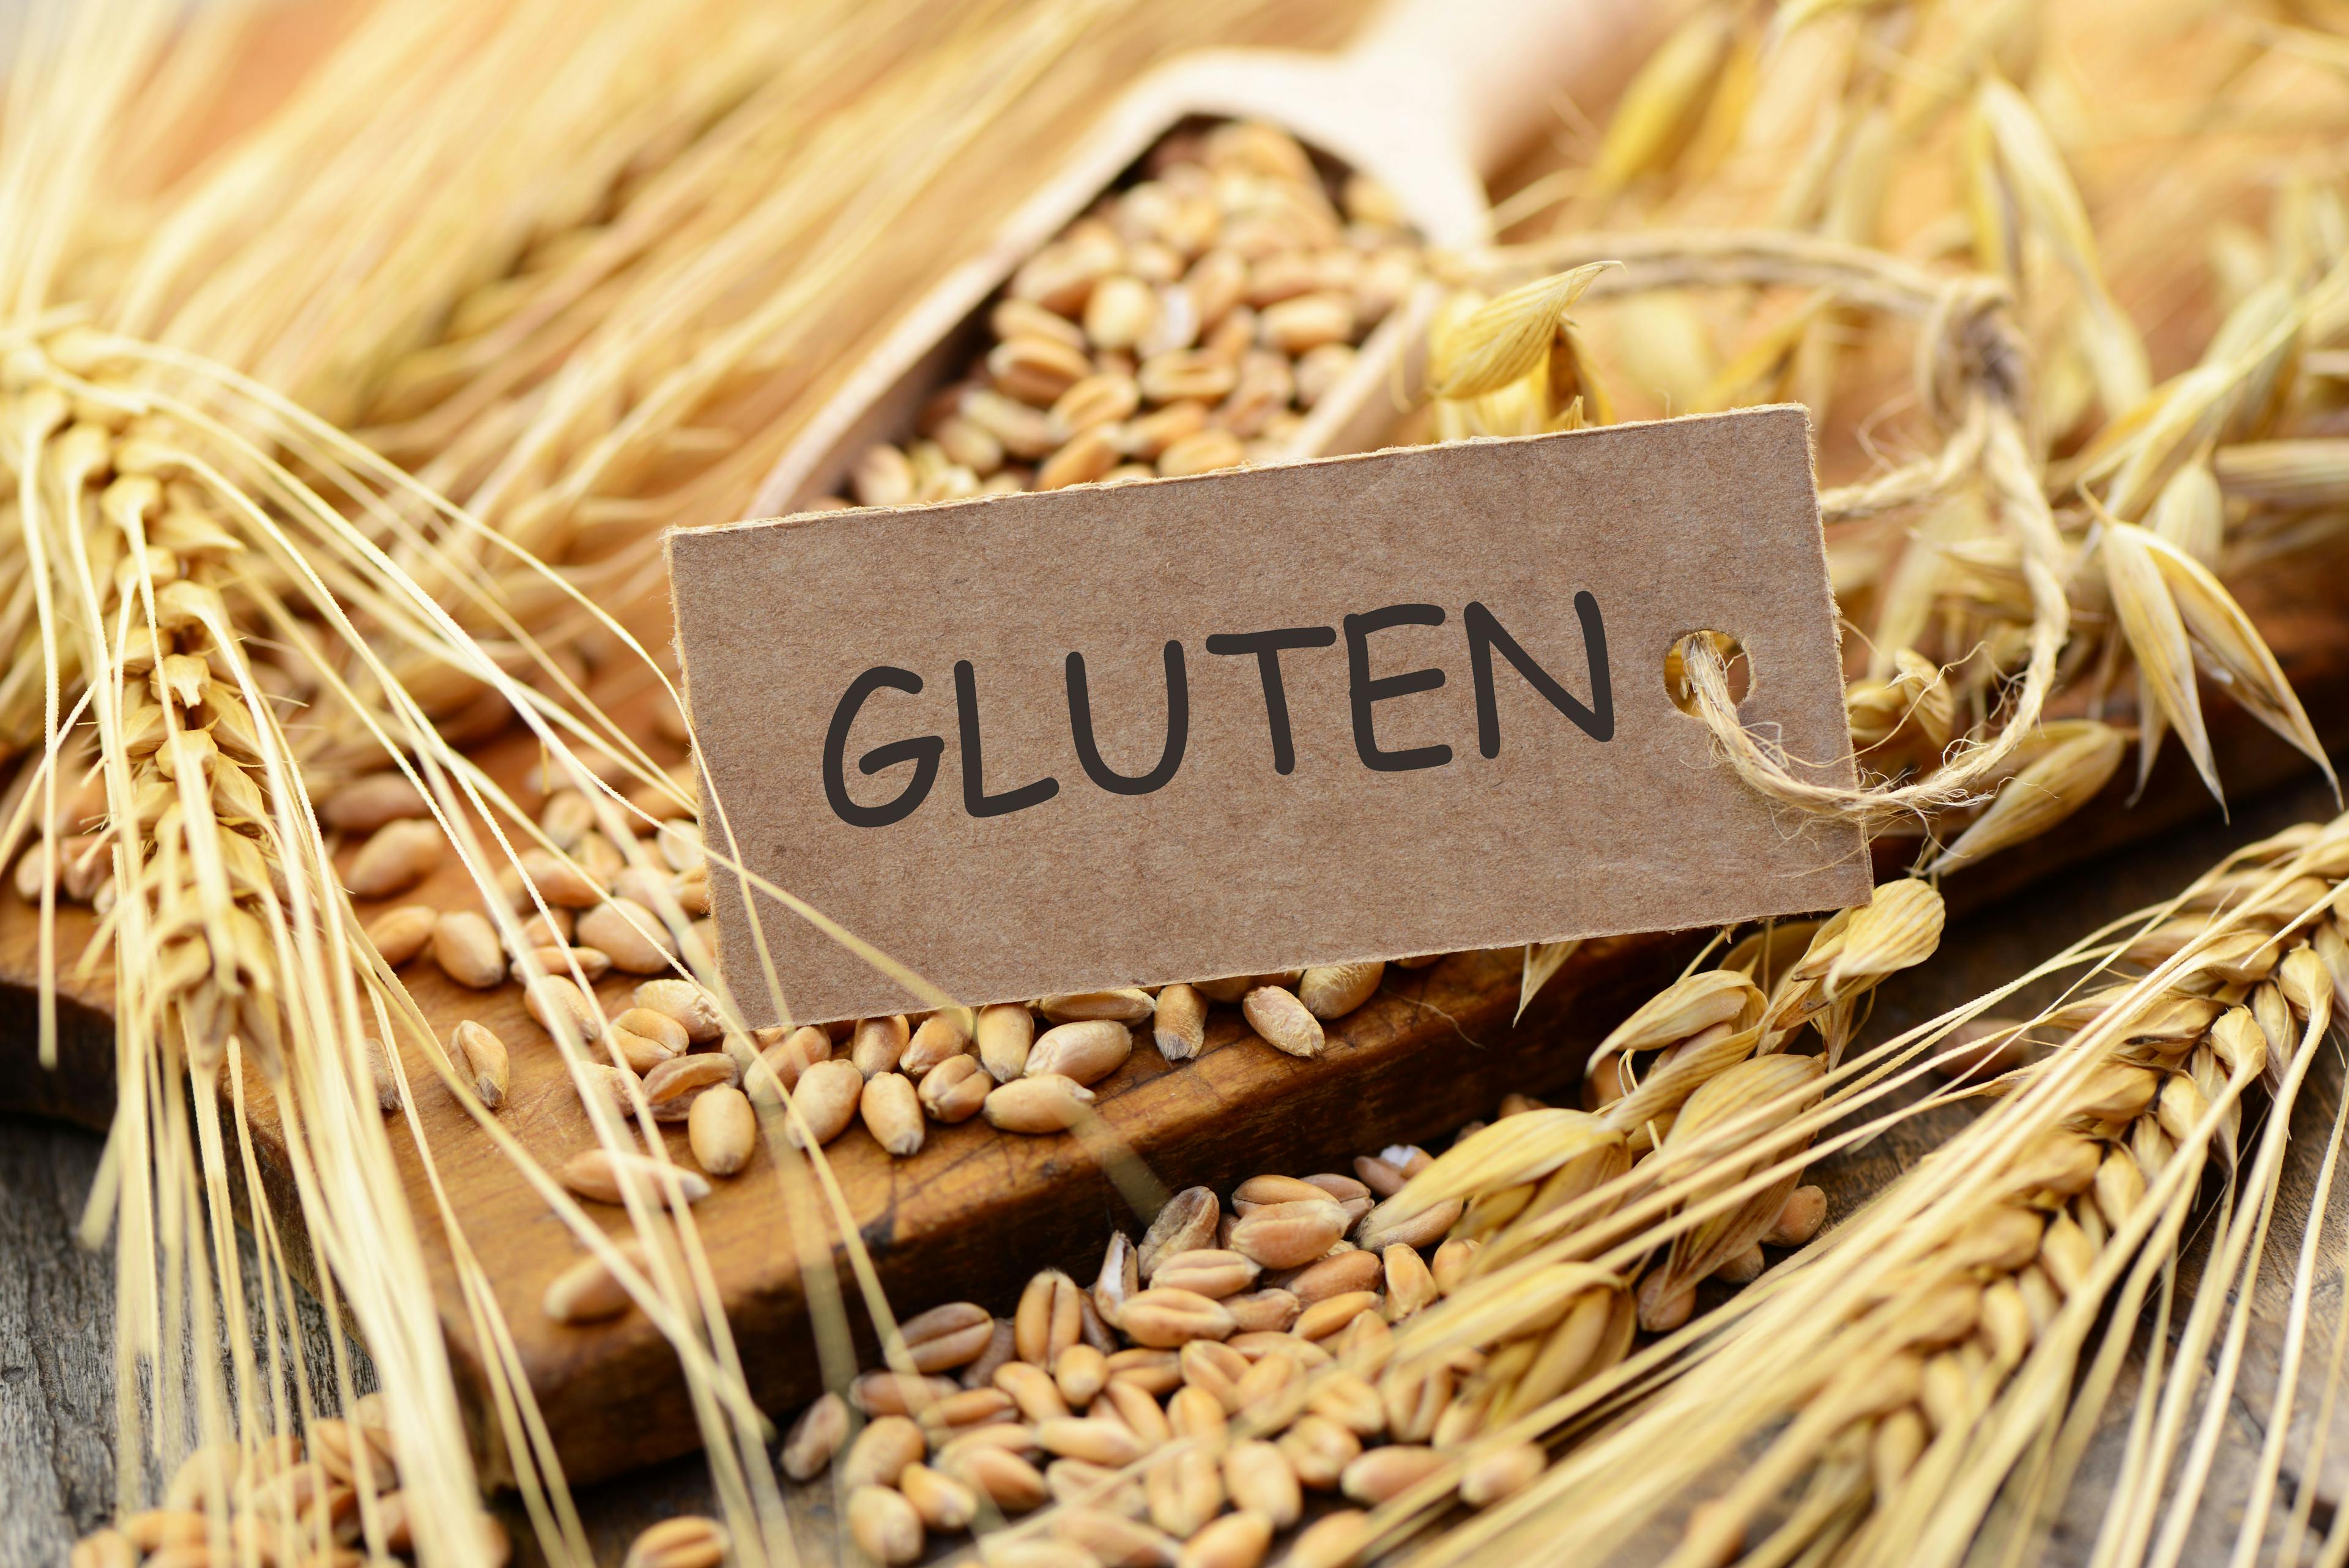 Gluten in Medications: Why Labeling Matters for Patients With Celiac Disease